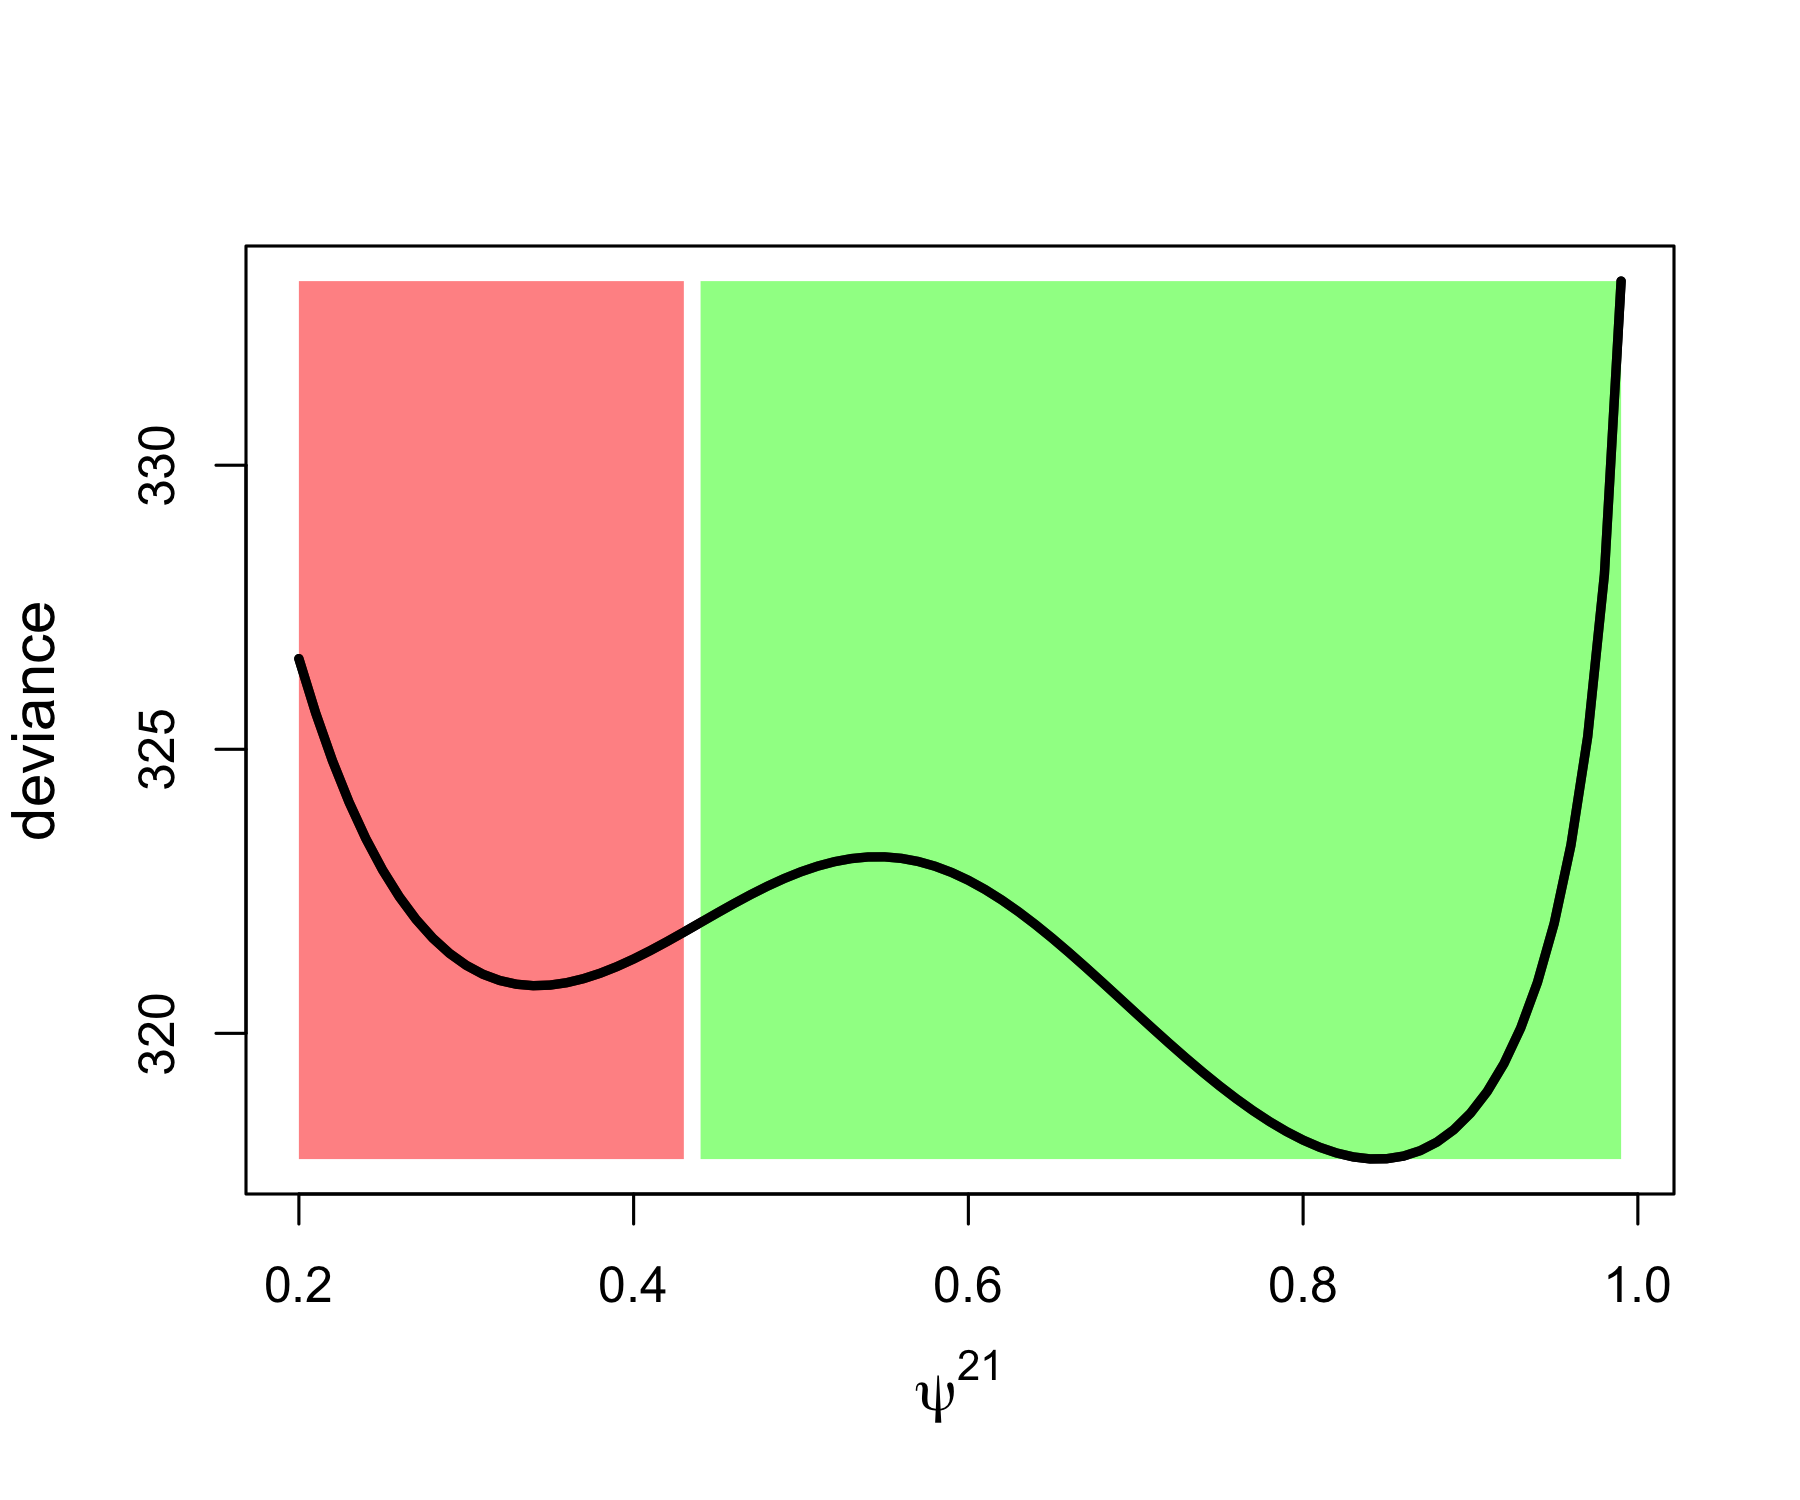 Influence of the choice of initial values on the convergence to the global minimum of the deviance illustrated with simulated data. The black curve is the profile deviance of the probability to move from site 2 to 1. If an initial value is picked in the red area, we end up in the local minimum while if it is picked in the green area, then we get the global minimum which corresponds to the maximum lilkelihood estimate.